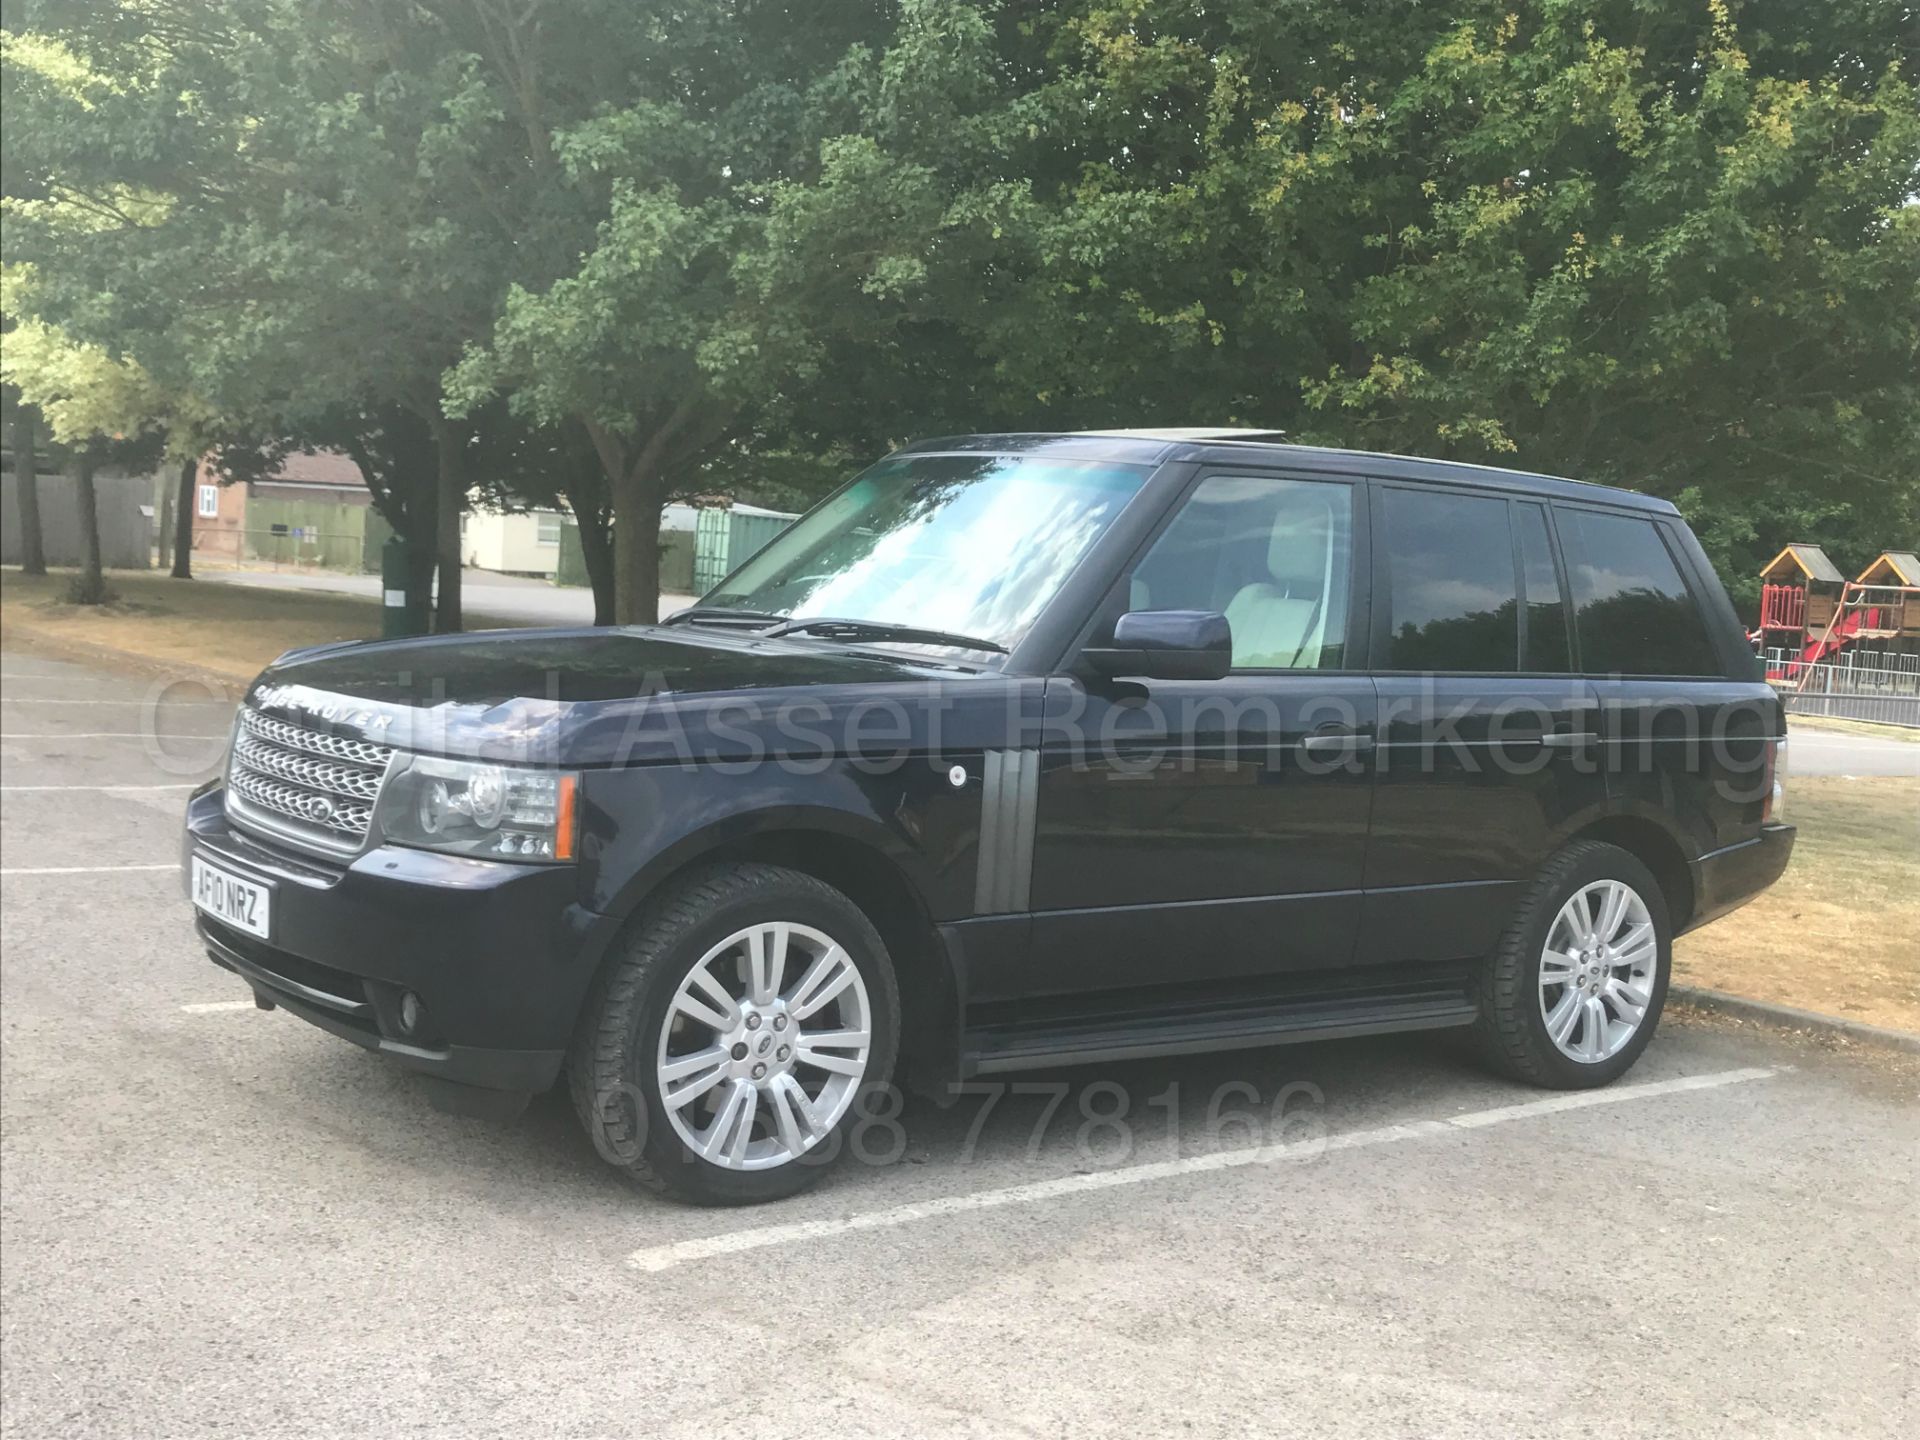 (On Sale) RANGE ROVER VOGUE **SE EDITION** (2010 - FACELIFT EDITION) 'TDV8 - 268 BHP - AUTO' **WOW** - Image 6 of 62